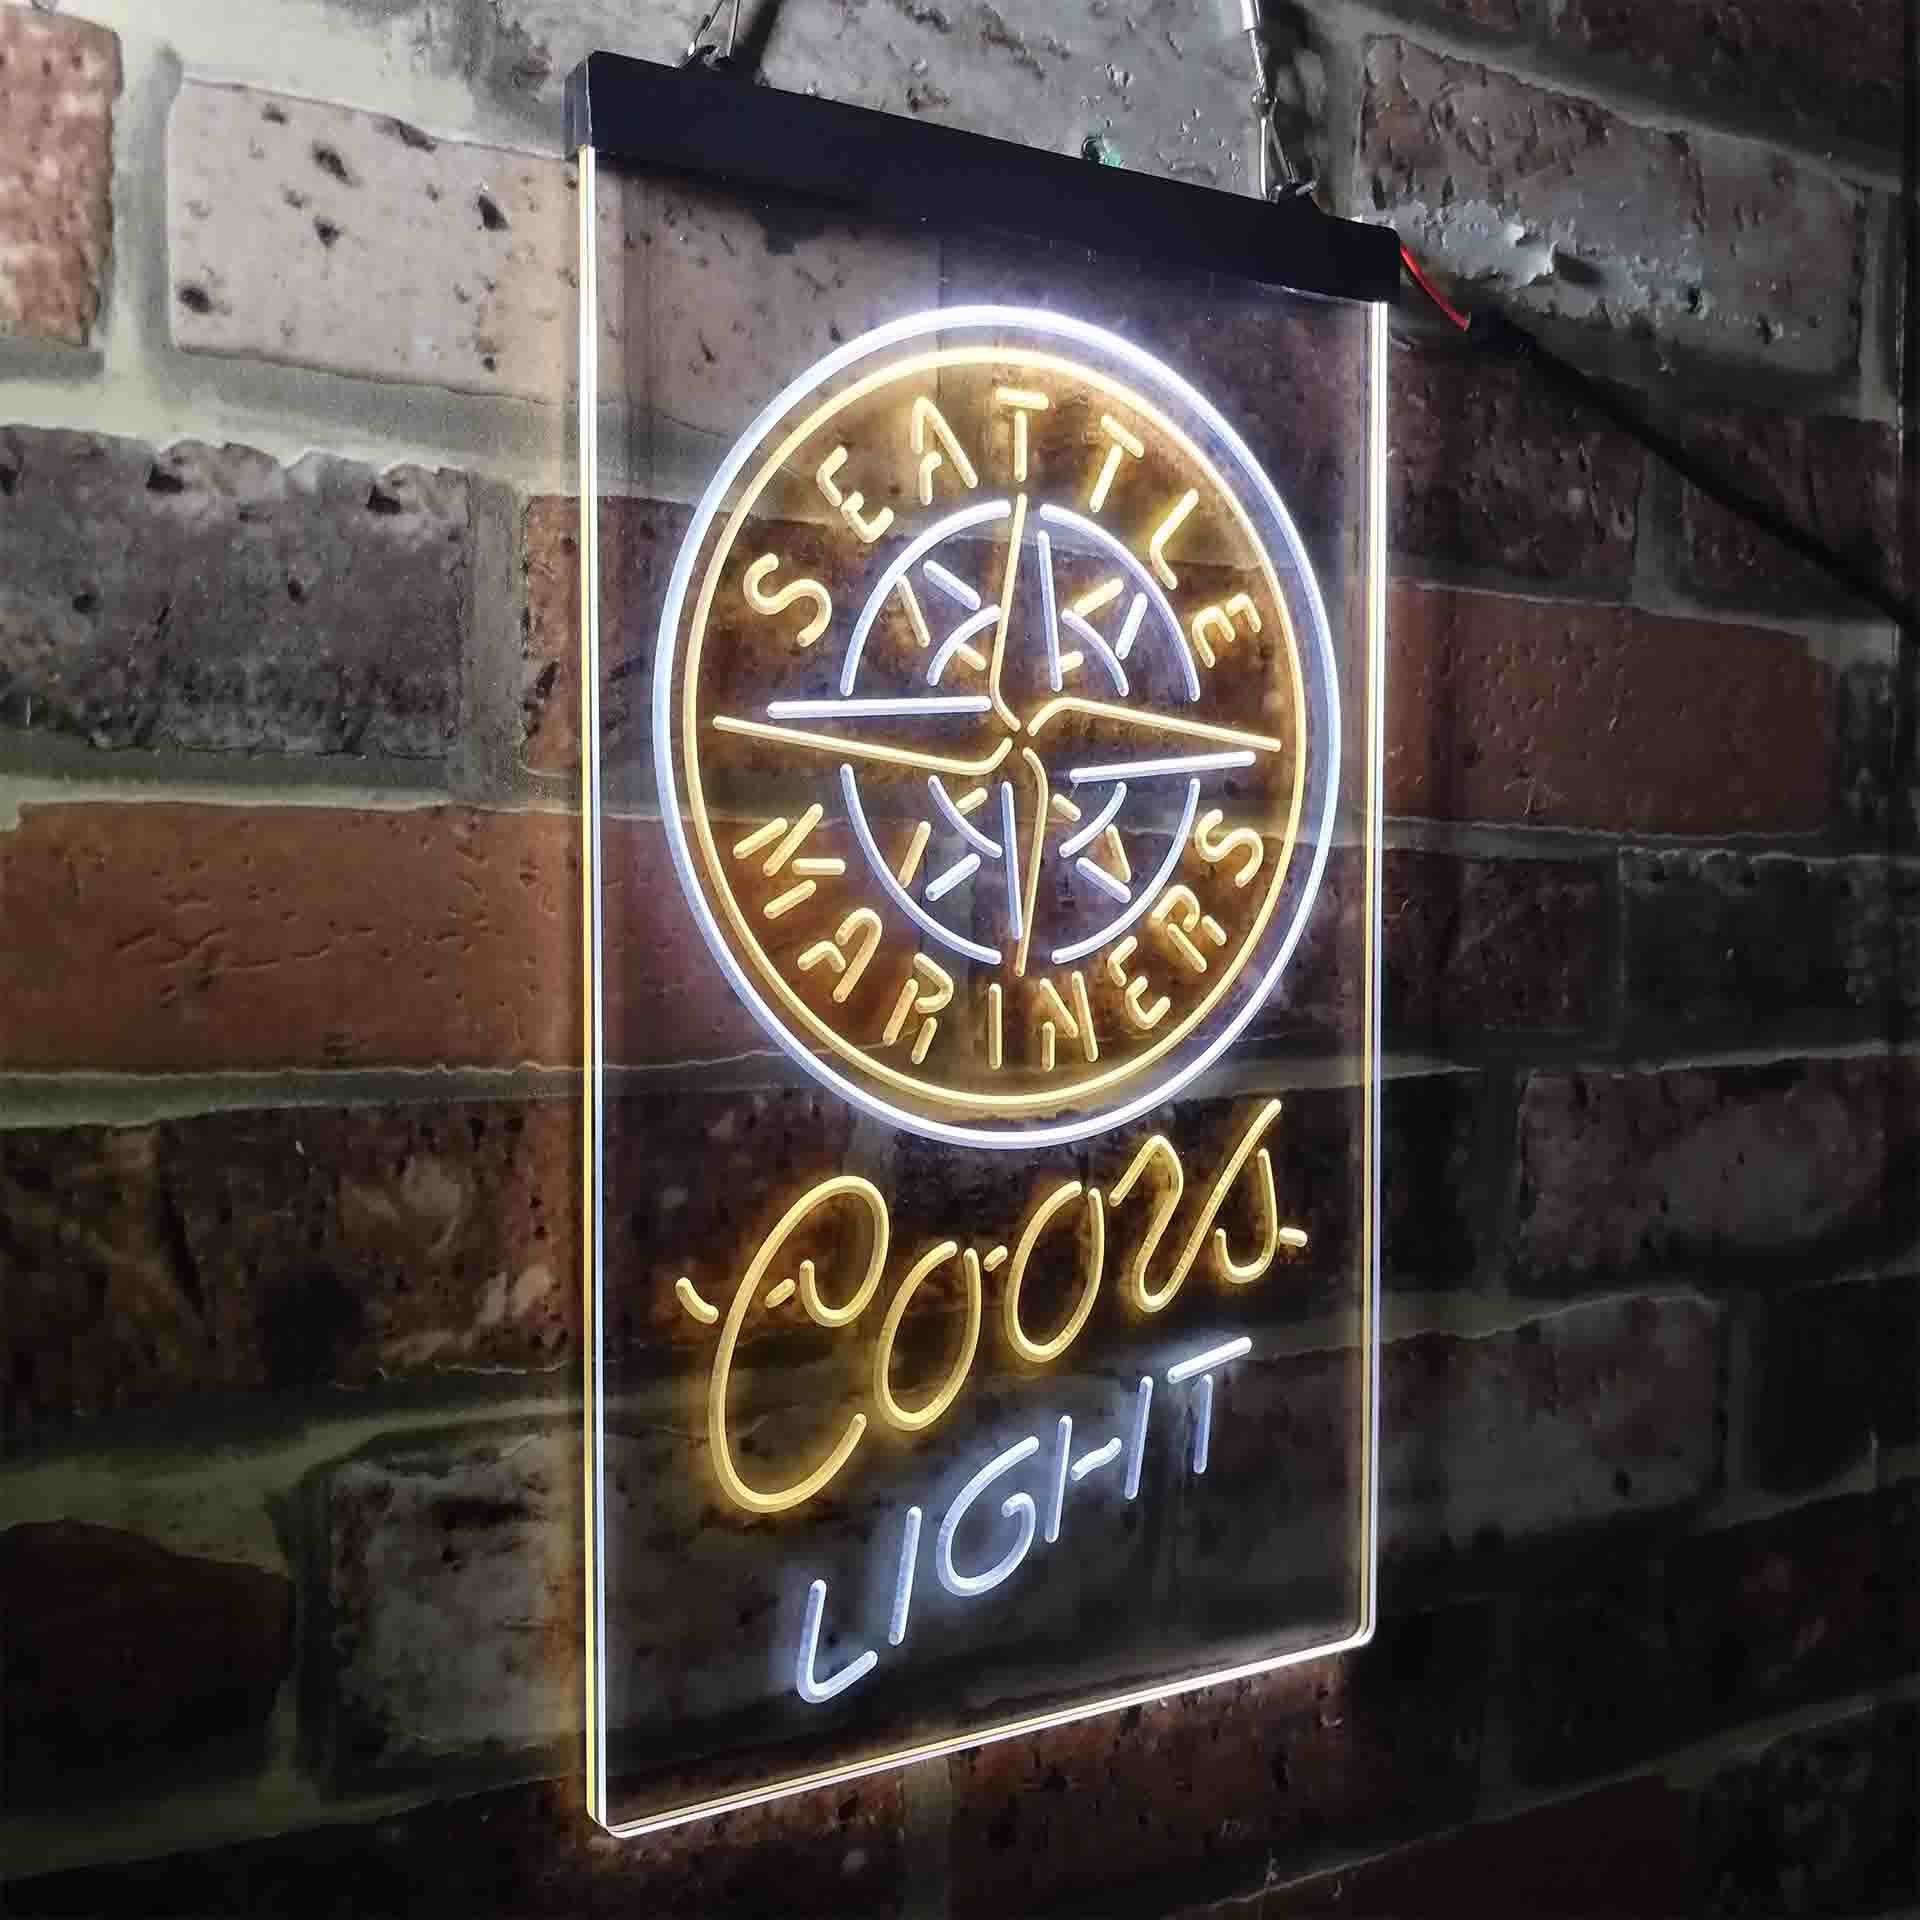 Seattle Mariners Coors Light LED Neon Sign